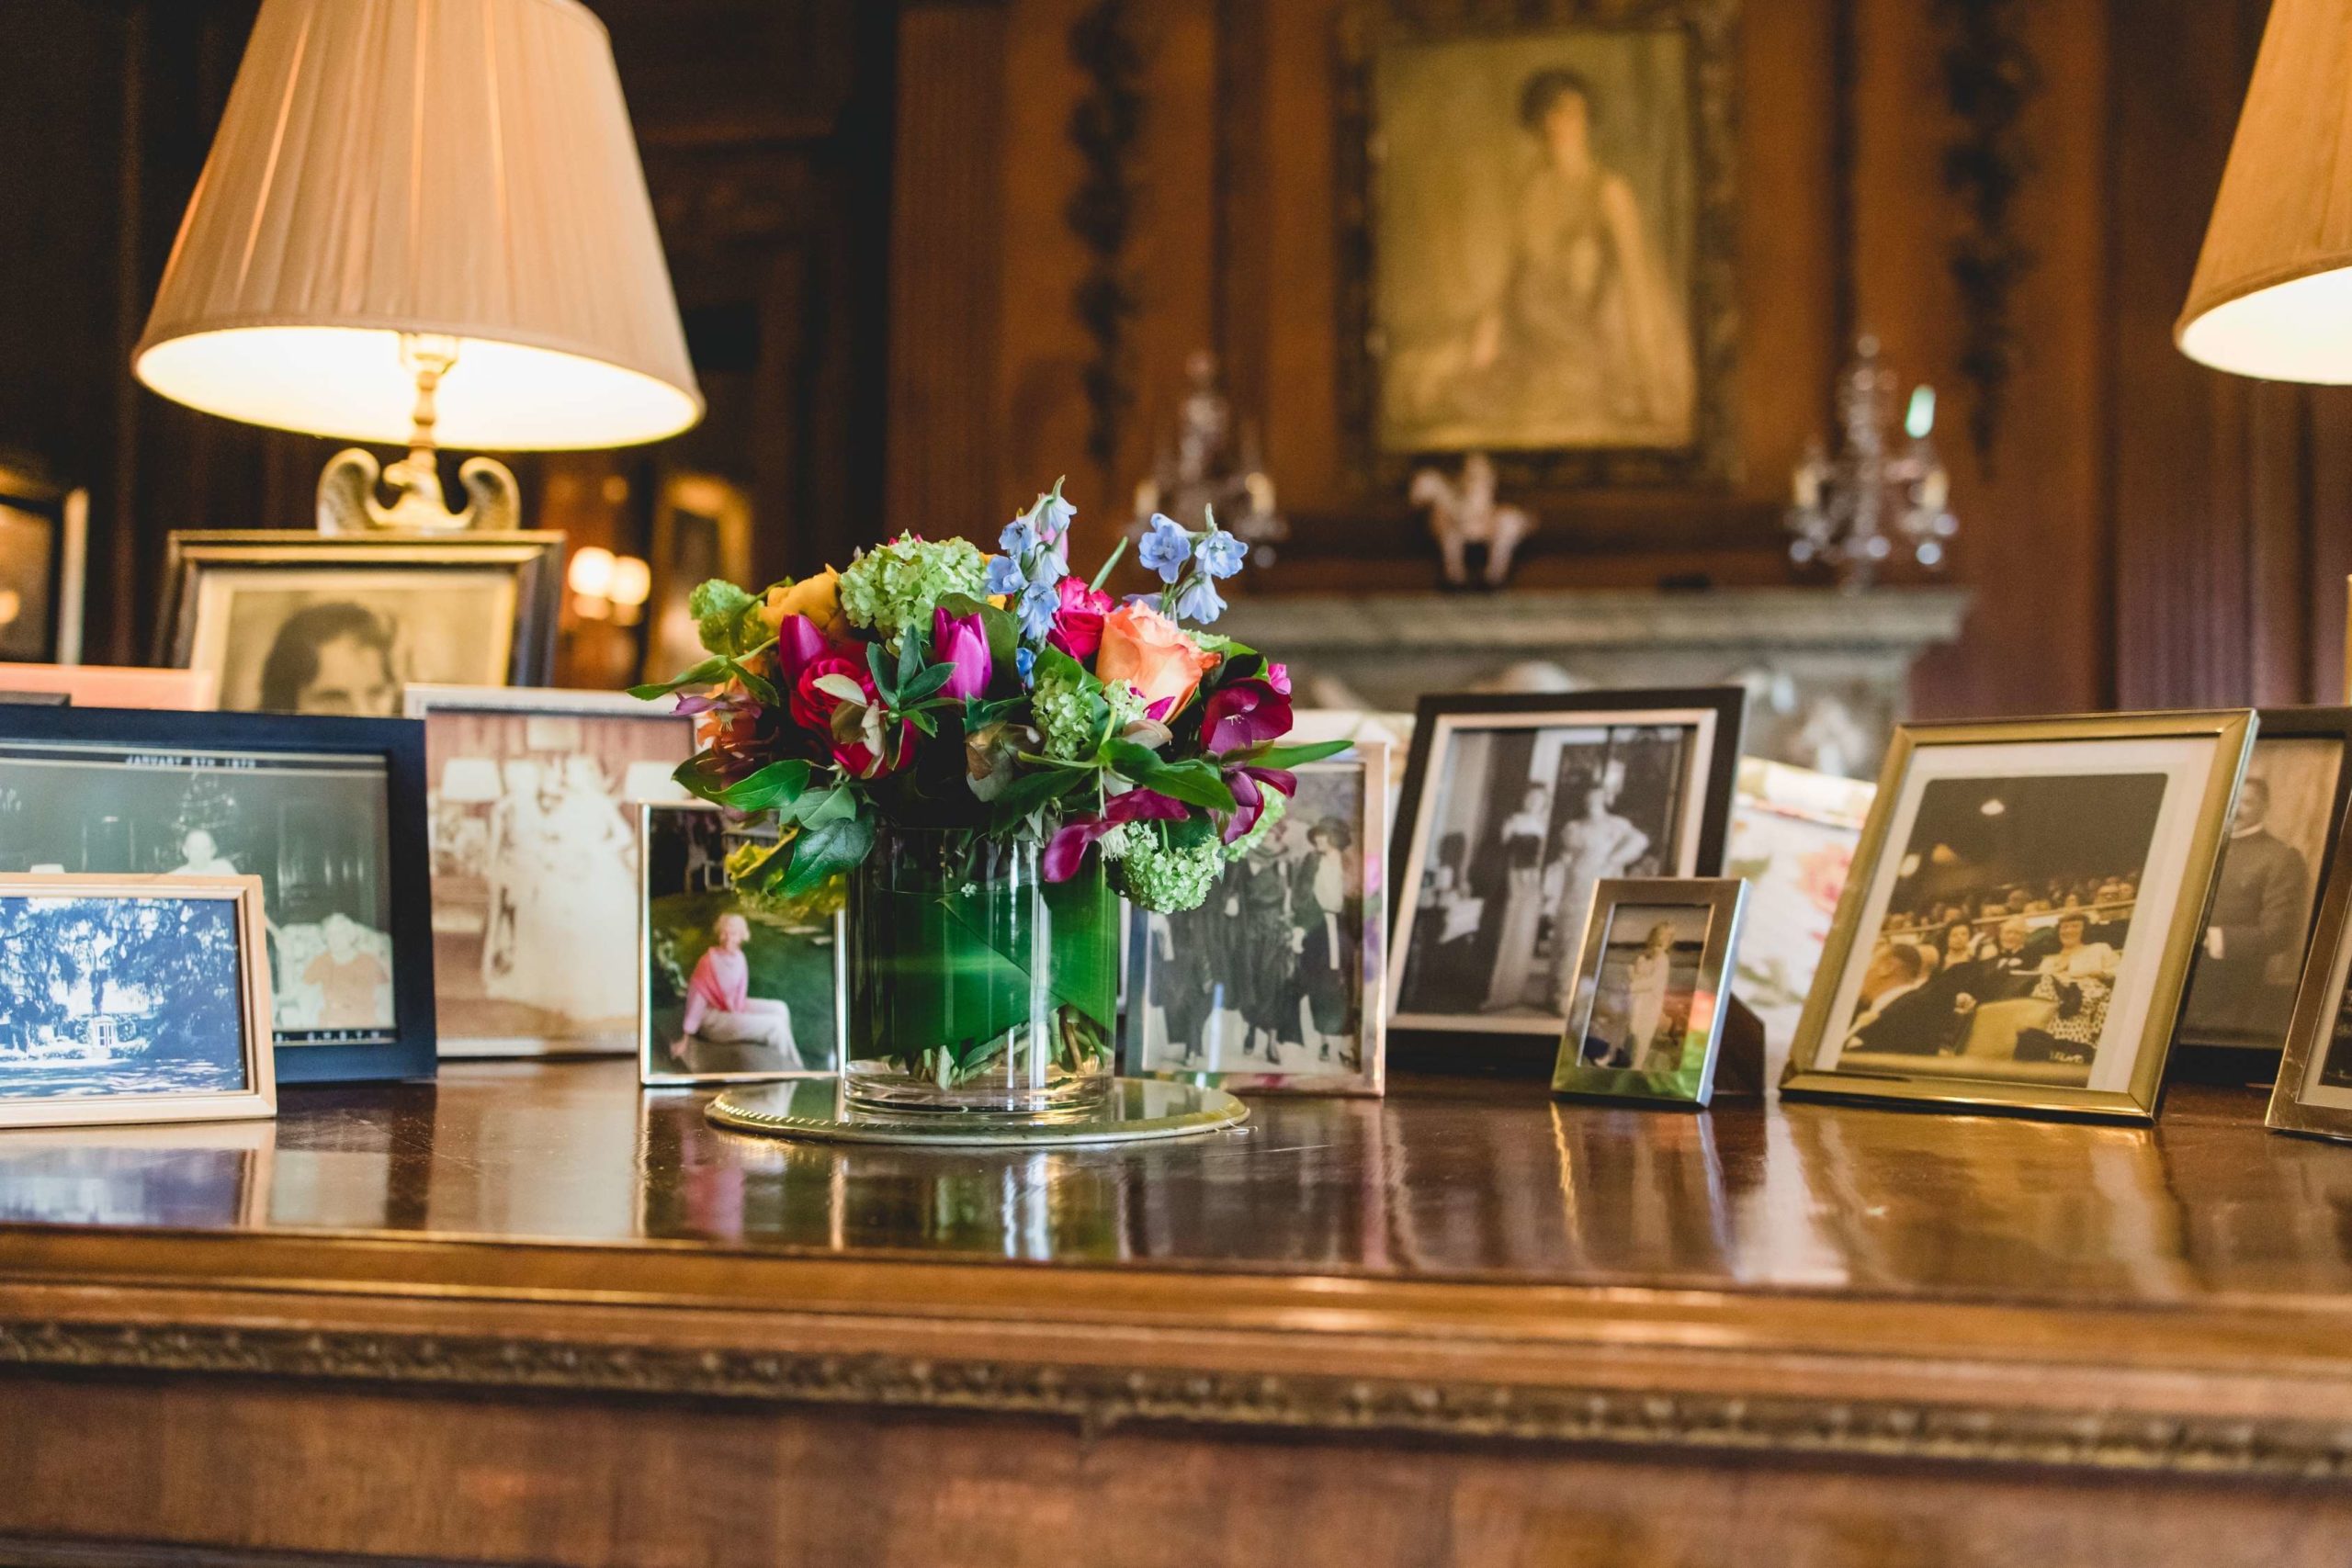 A vase of colorful flowers on a wooden table with many photographs in picture frames and two lamps